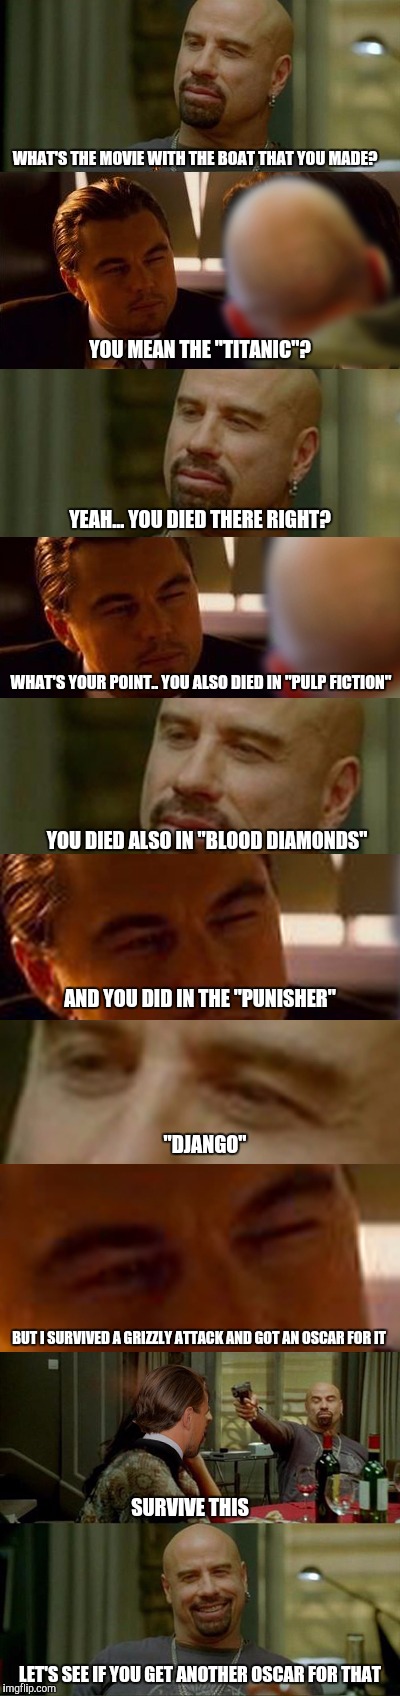 Leo VS Johnny Staring Contest | WHAT'S THE MOVIE WITH THE BOAT THAT YOU MADE? YOU MEAN THE "TITANIC"? YEAH... YOU DIED THERE RIGHT? WHAT'S YOUR POINT.. YOU ALSO DIED IN "PULP FICTION"; YOU DIED ALSO IN "BLOOD DIAMONDS"; AND YOU DID IN THE "PUNISHER"; "DJANGO"; BUT I SURVIVED A GRIZZLY ATTACK AND GOT AN OSCAR FOR IT; SURVIVE THIS; LET'S SEE IF YOU GET ANOTHER OSCAR FOR THAT | image tagged in leo vs johnny staring contest,scumbag | made w/ Imgflip meme maker